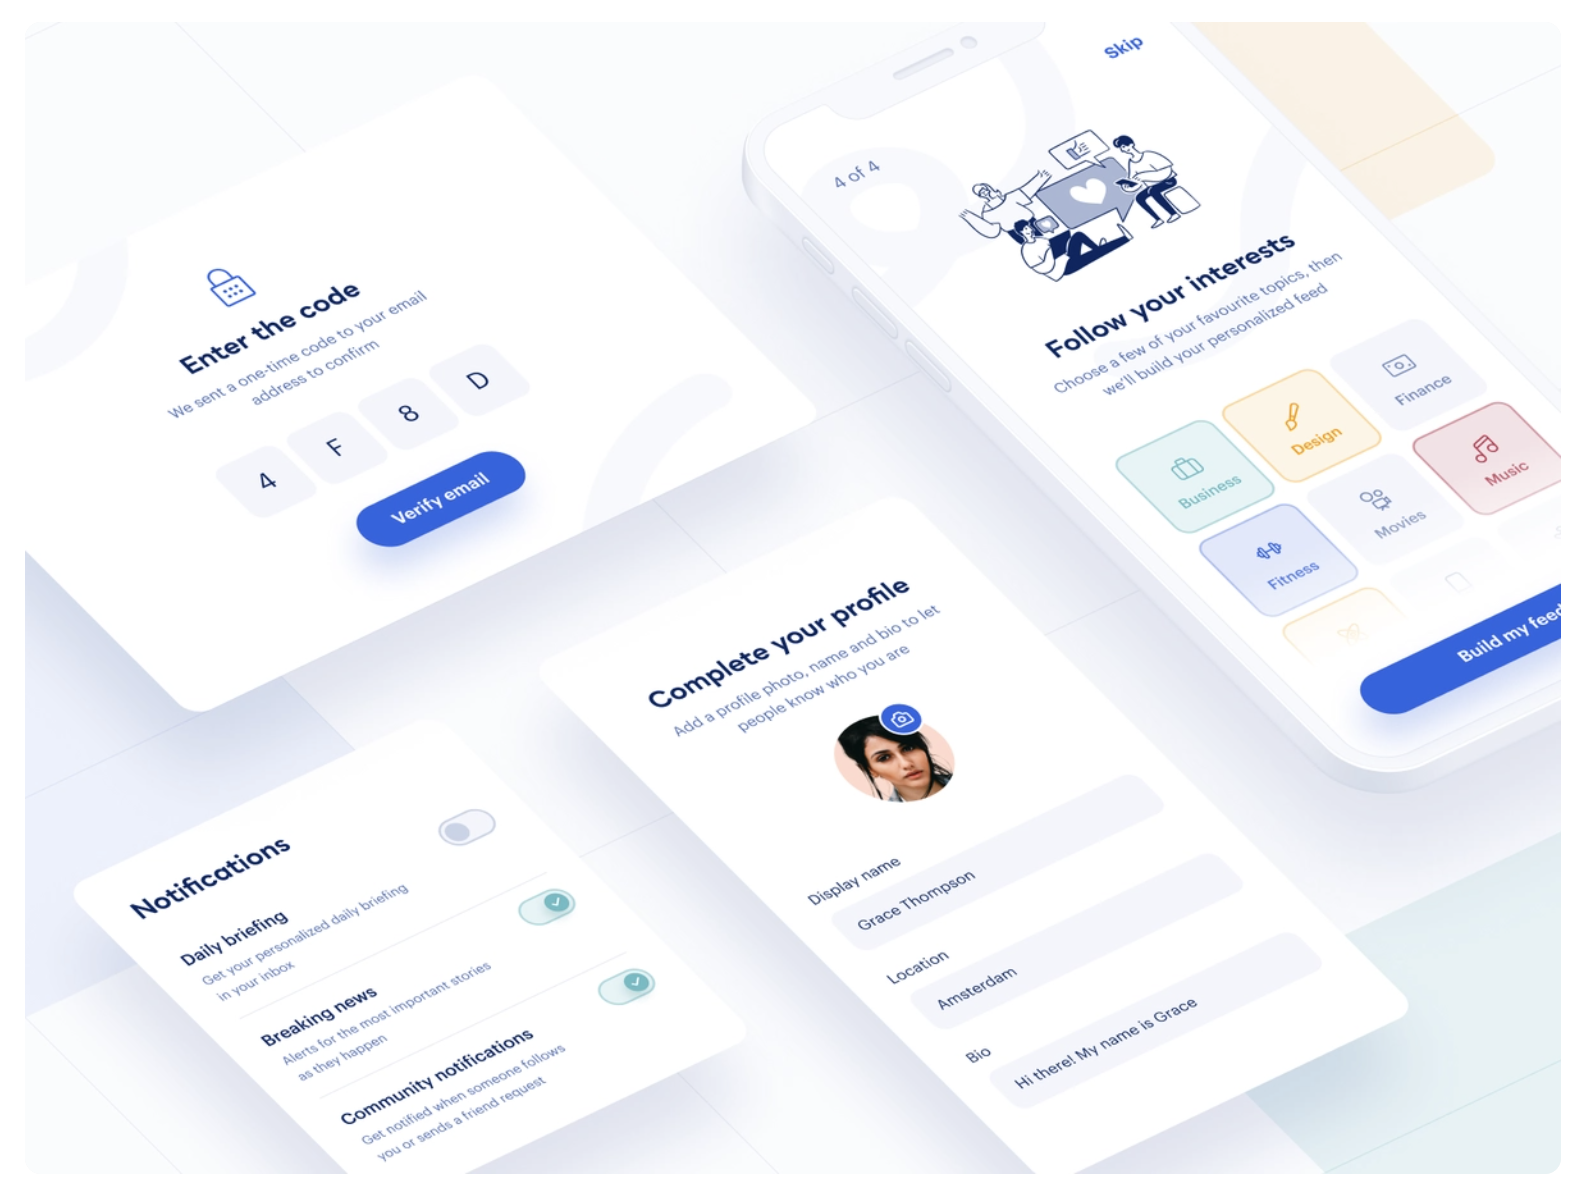 How to create stunning UI/UX designs for varied projects